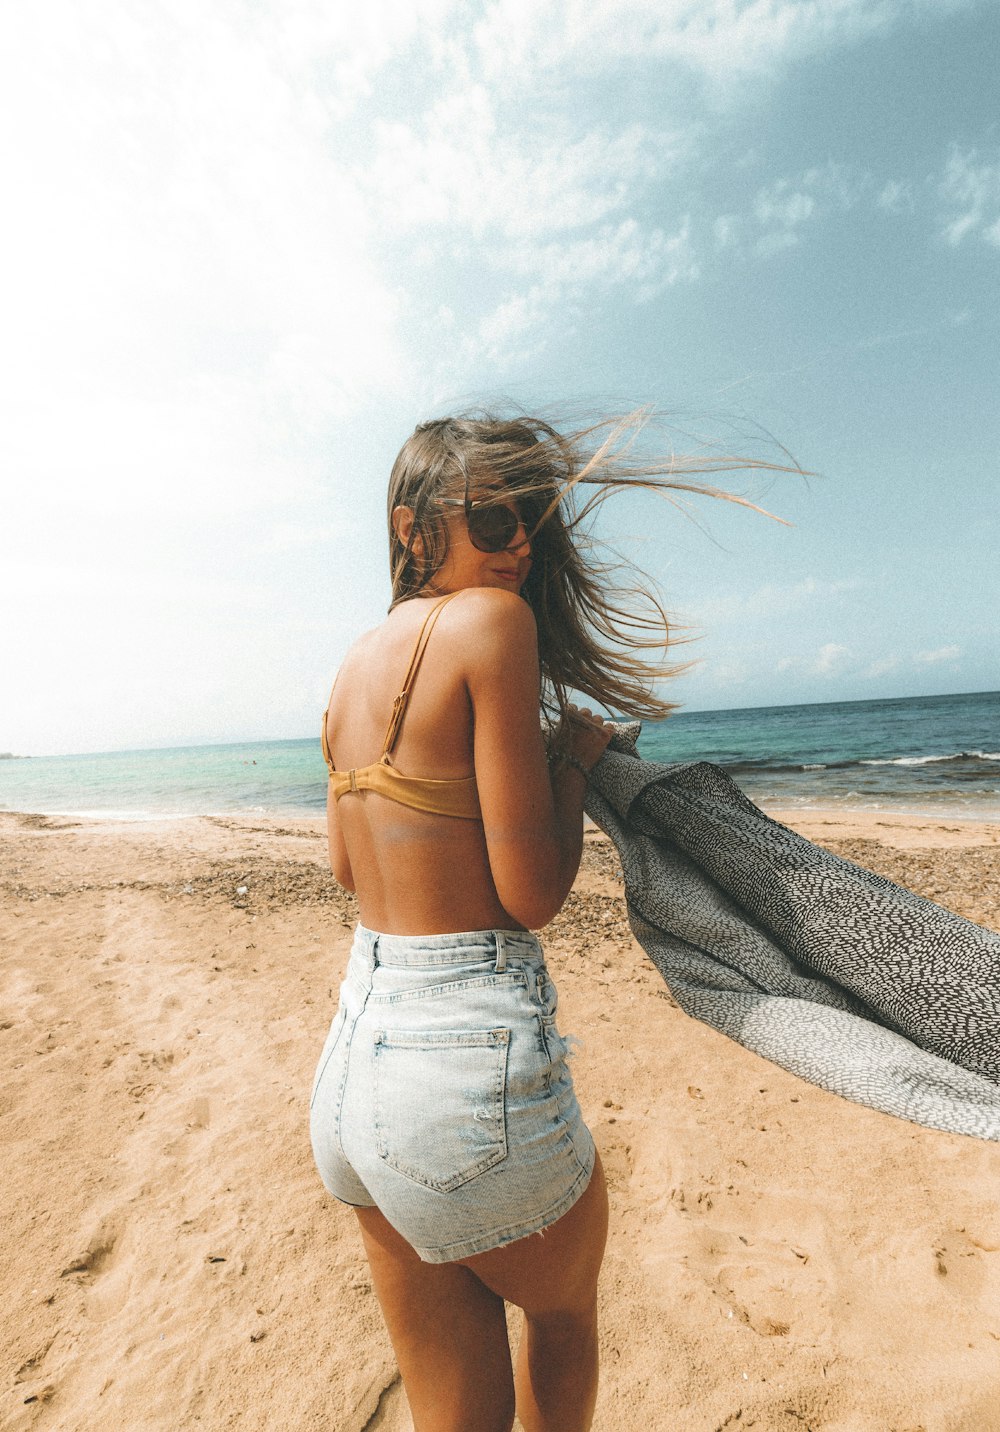 woman in gray tank top and blue denim jeans standing on beach during daytime